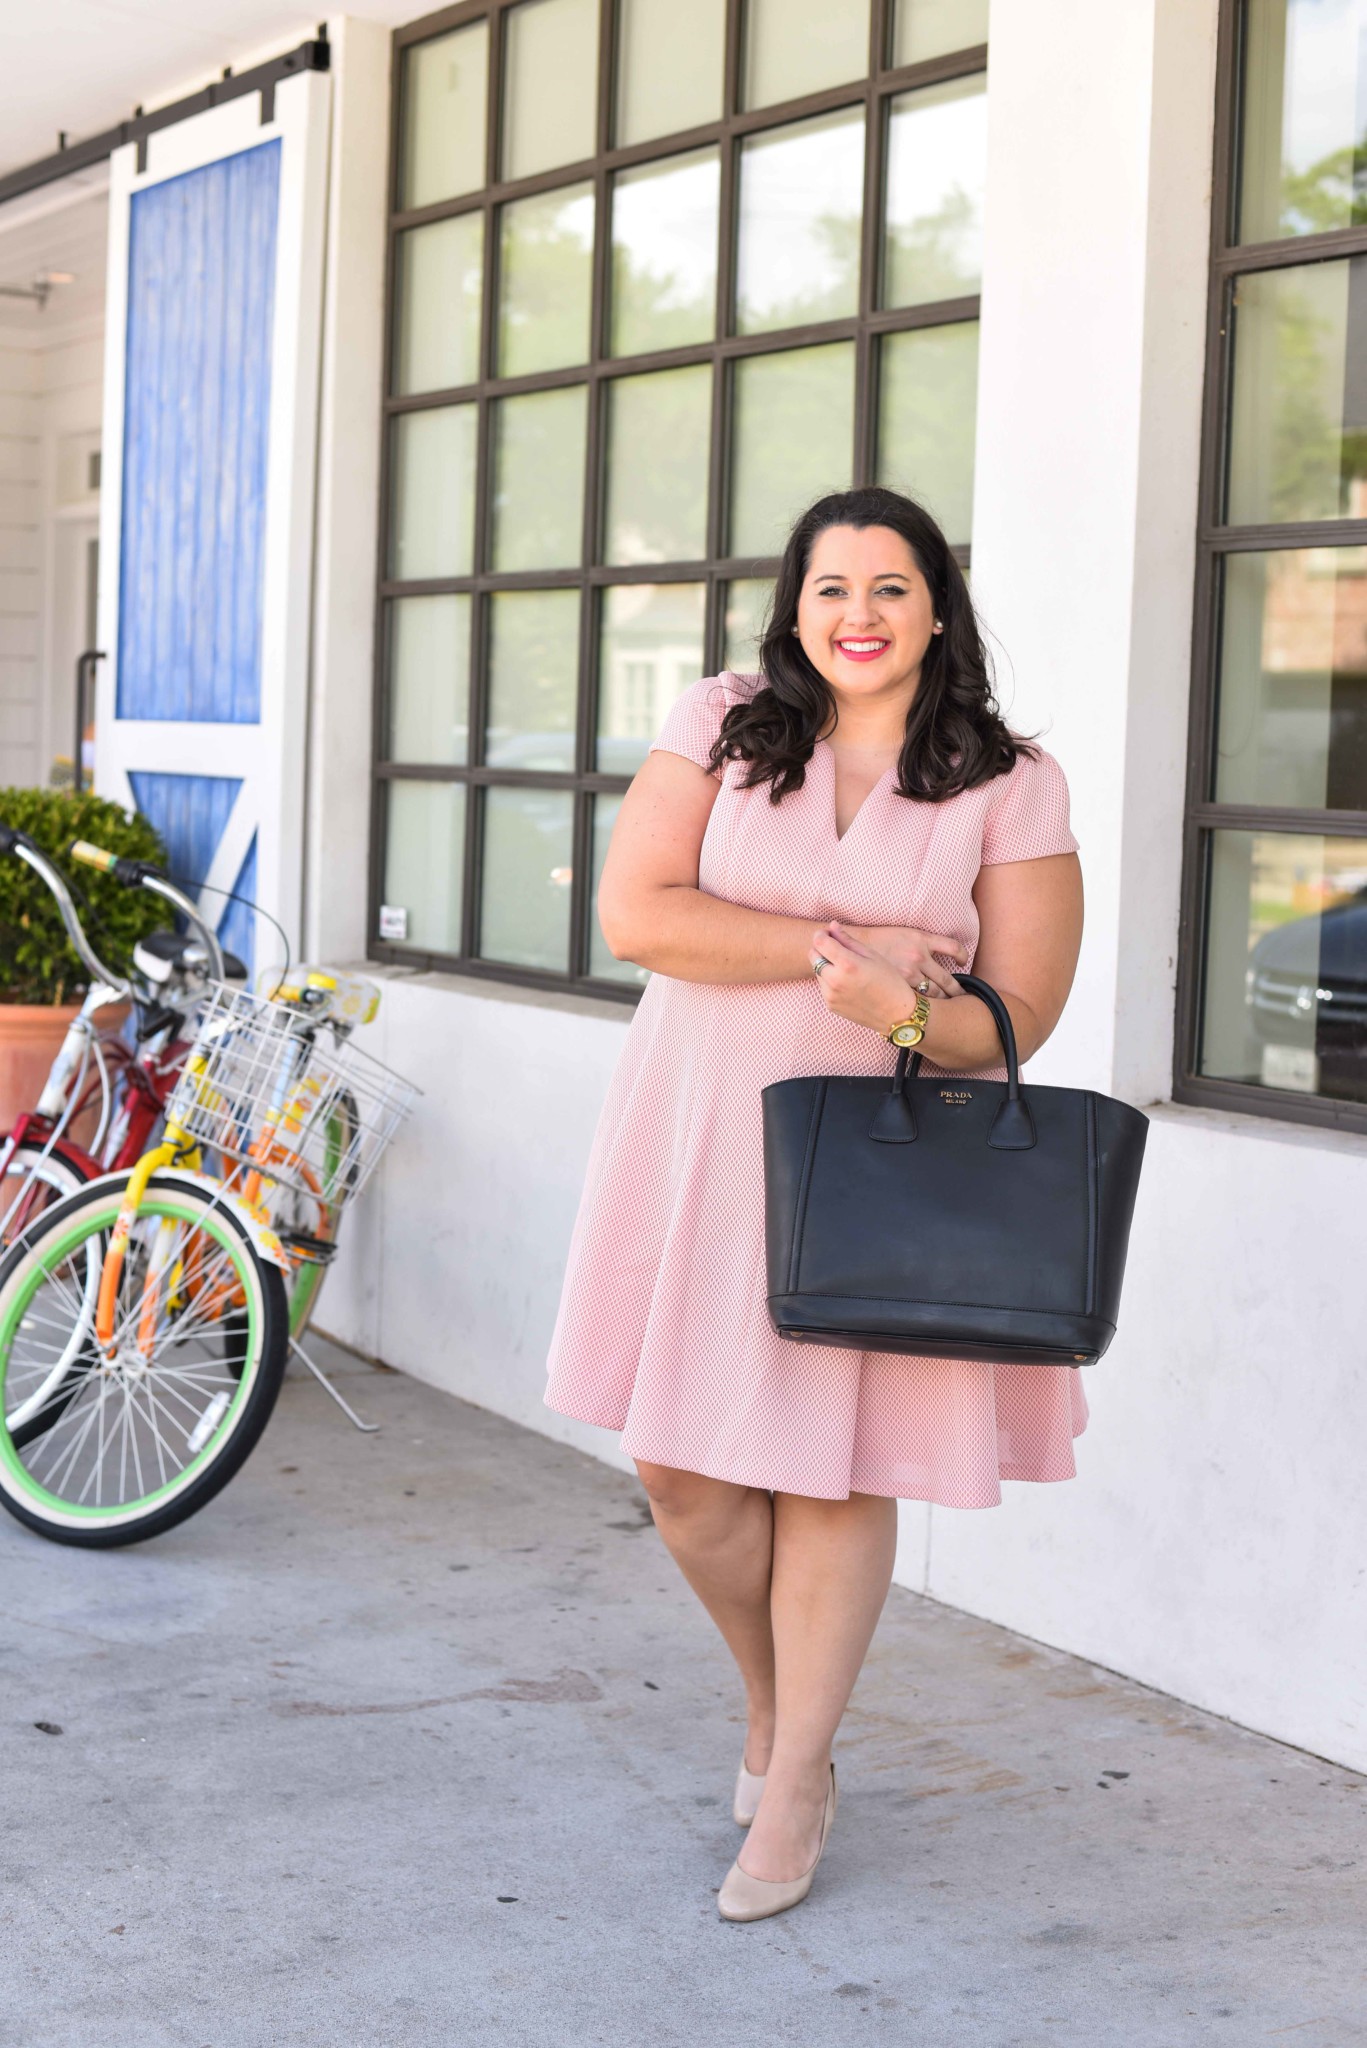 Finding the perfect Mother's Day gift can be tough, especially when it's last minute. I'm sharing 5 last minute Mother's Day gifts that will be sure to put a smile on your Mom's face. I'm also sharing the perfect Mother's Day brunch outfit. Curvy style, plus size style, fashion, Mother's Day outfit